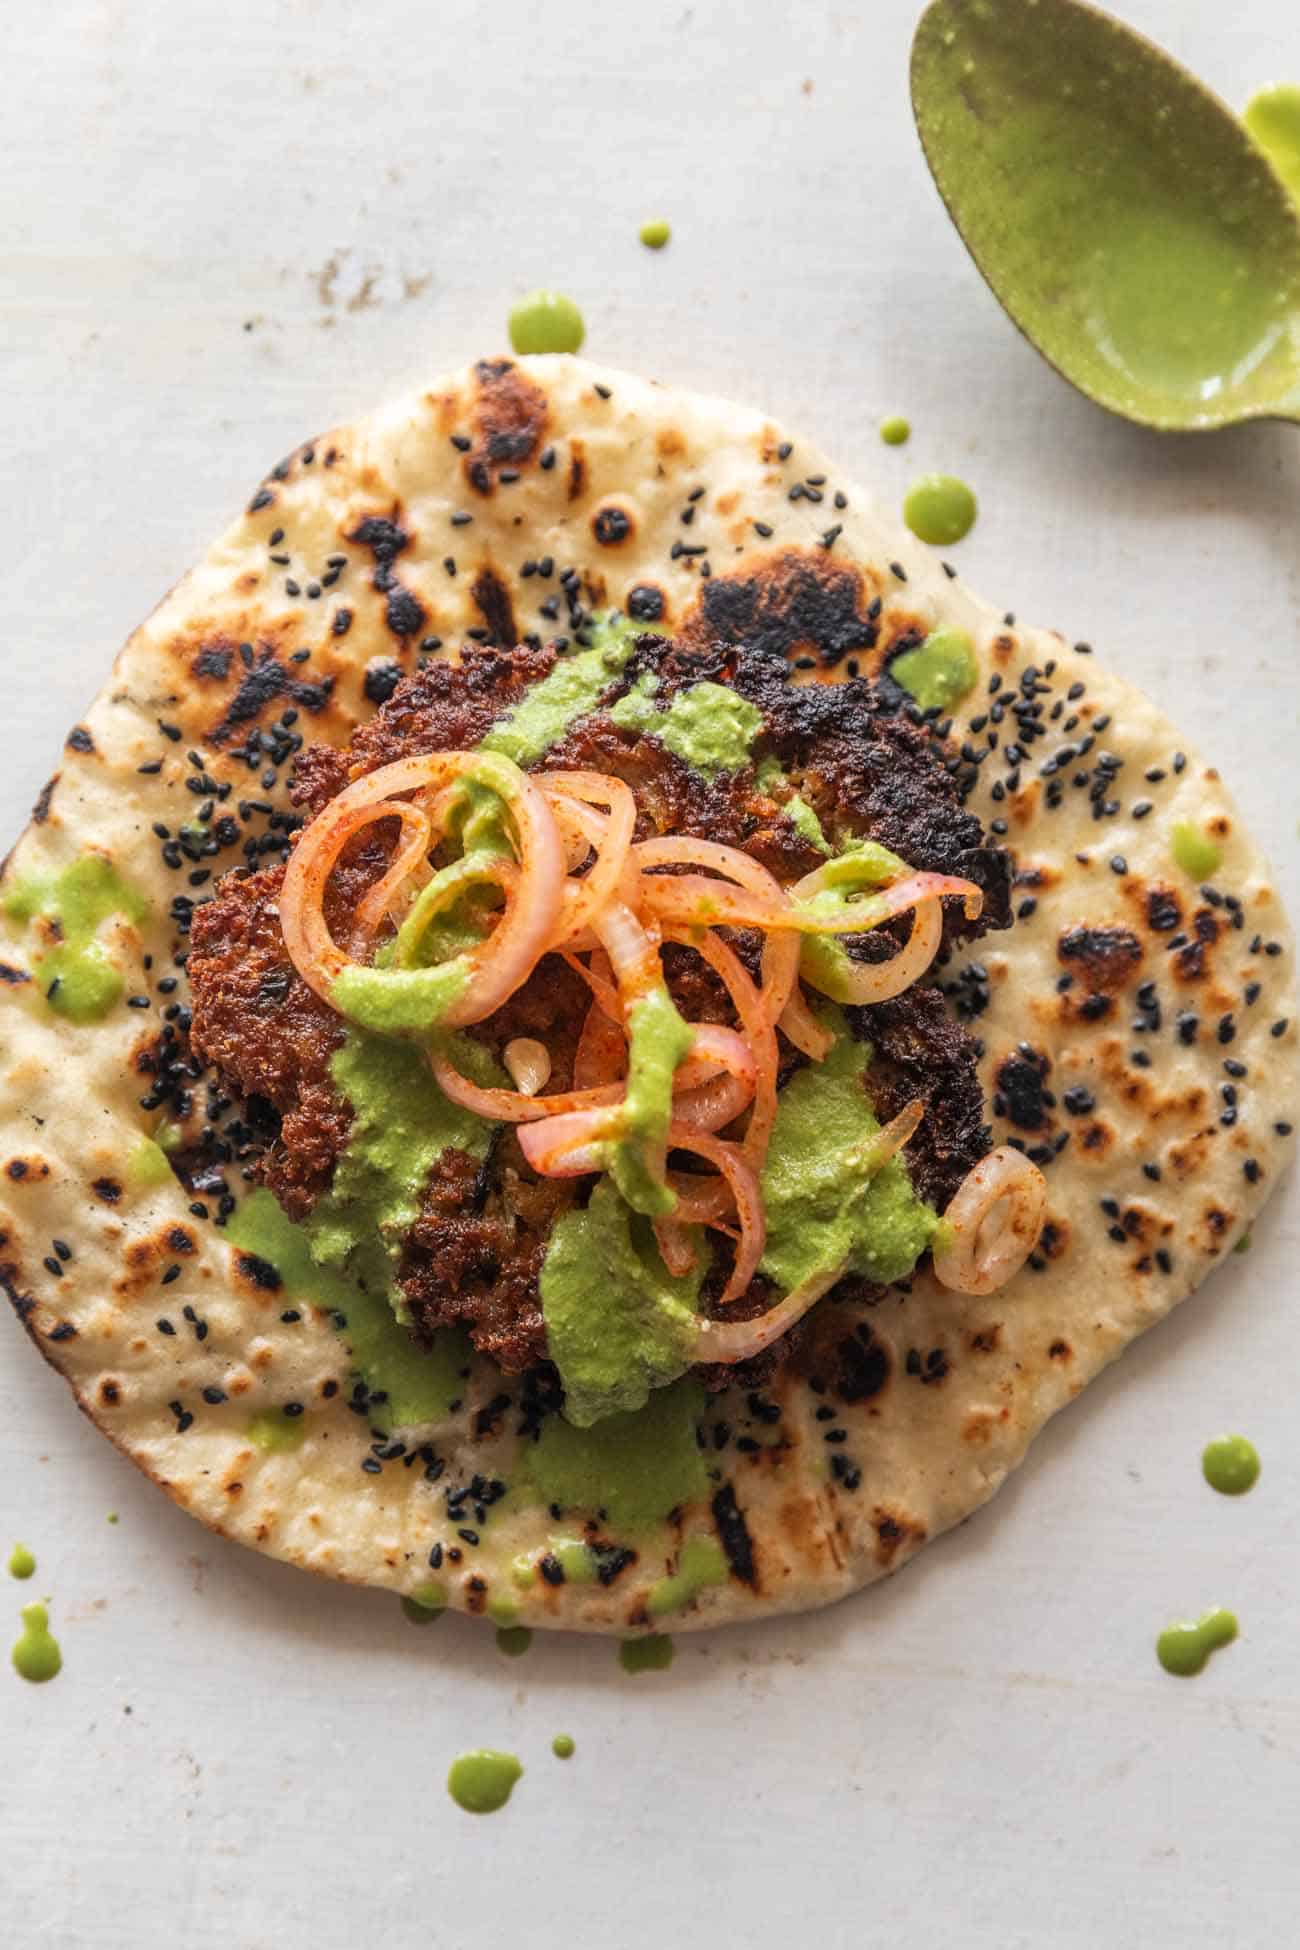 chapli kebab placed on naan with onions and mint chutney, served as a taco